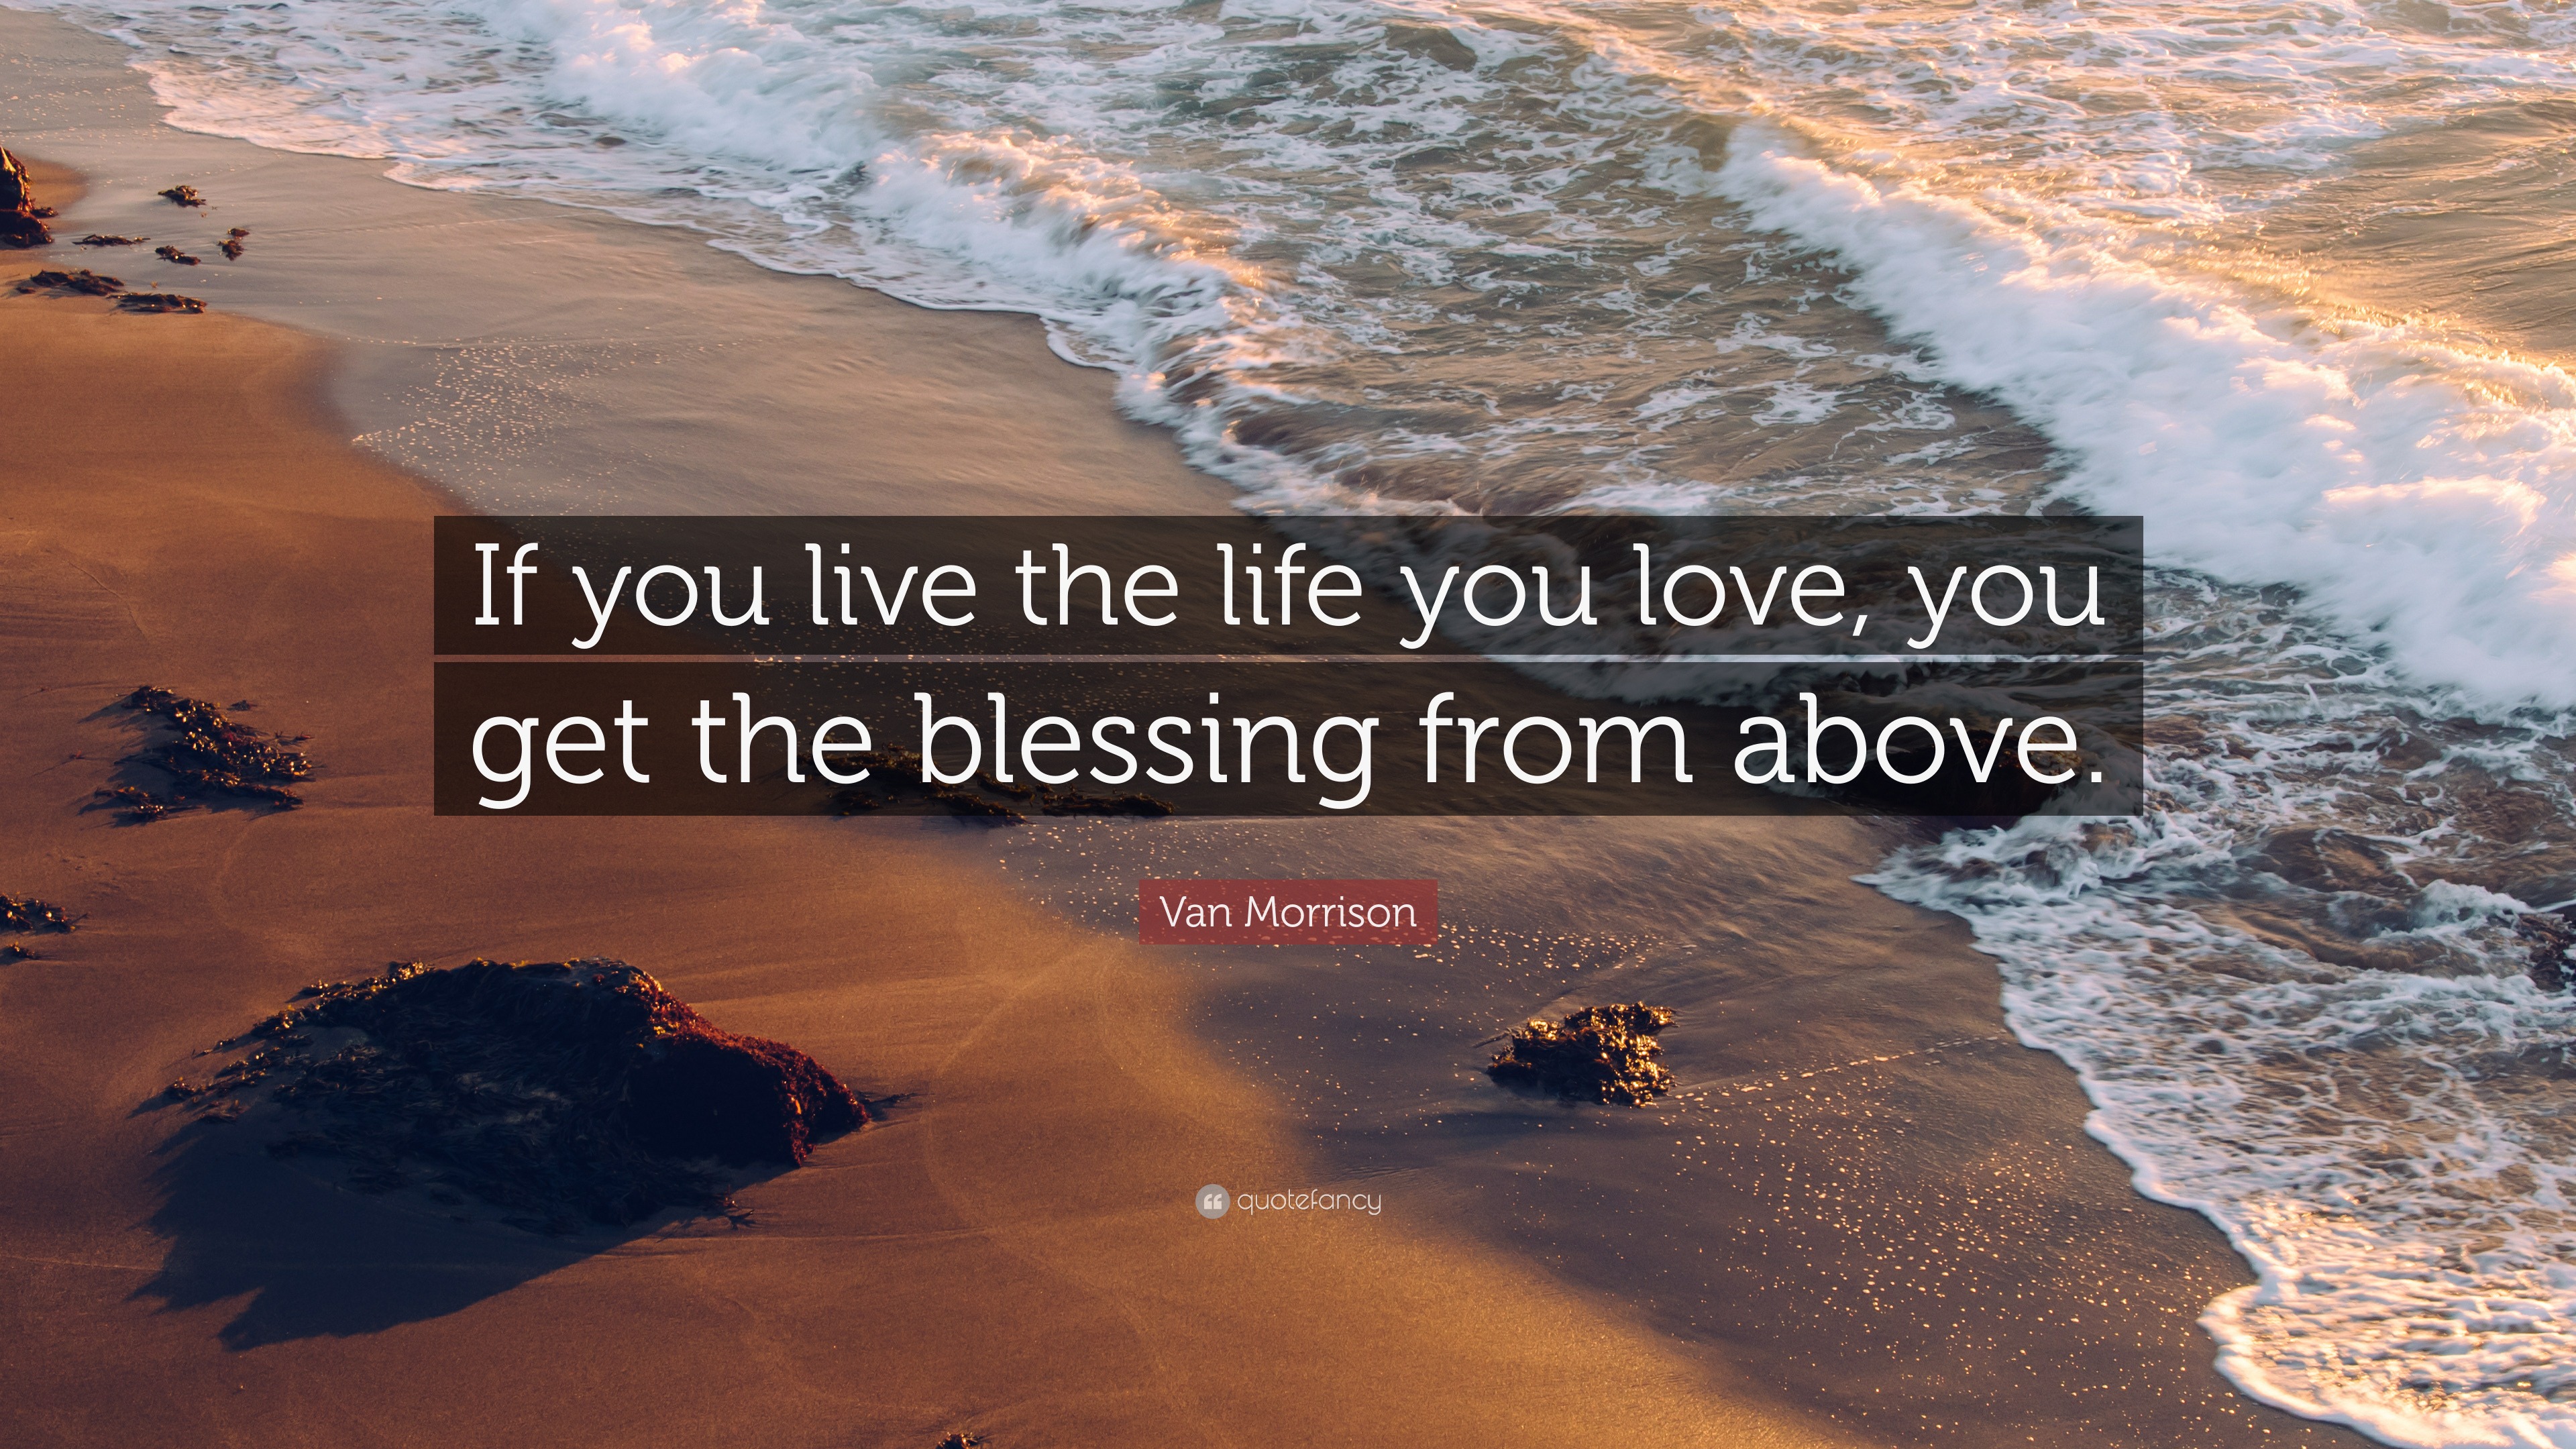 Van Morrison Quote “If you live the life you love you the